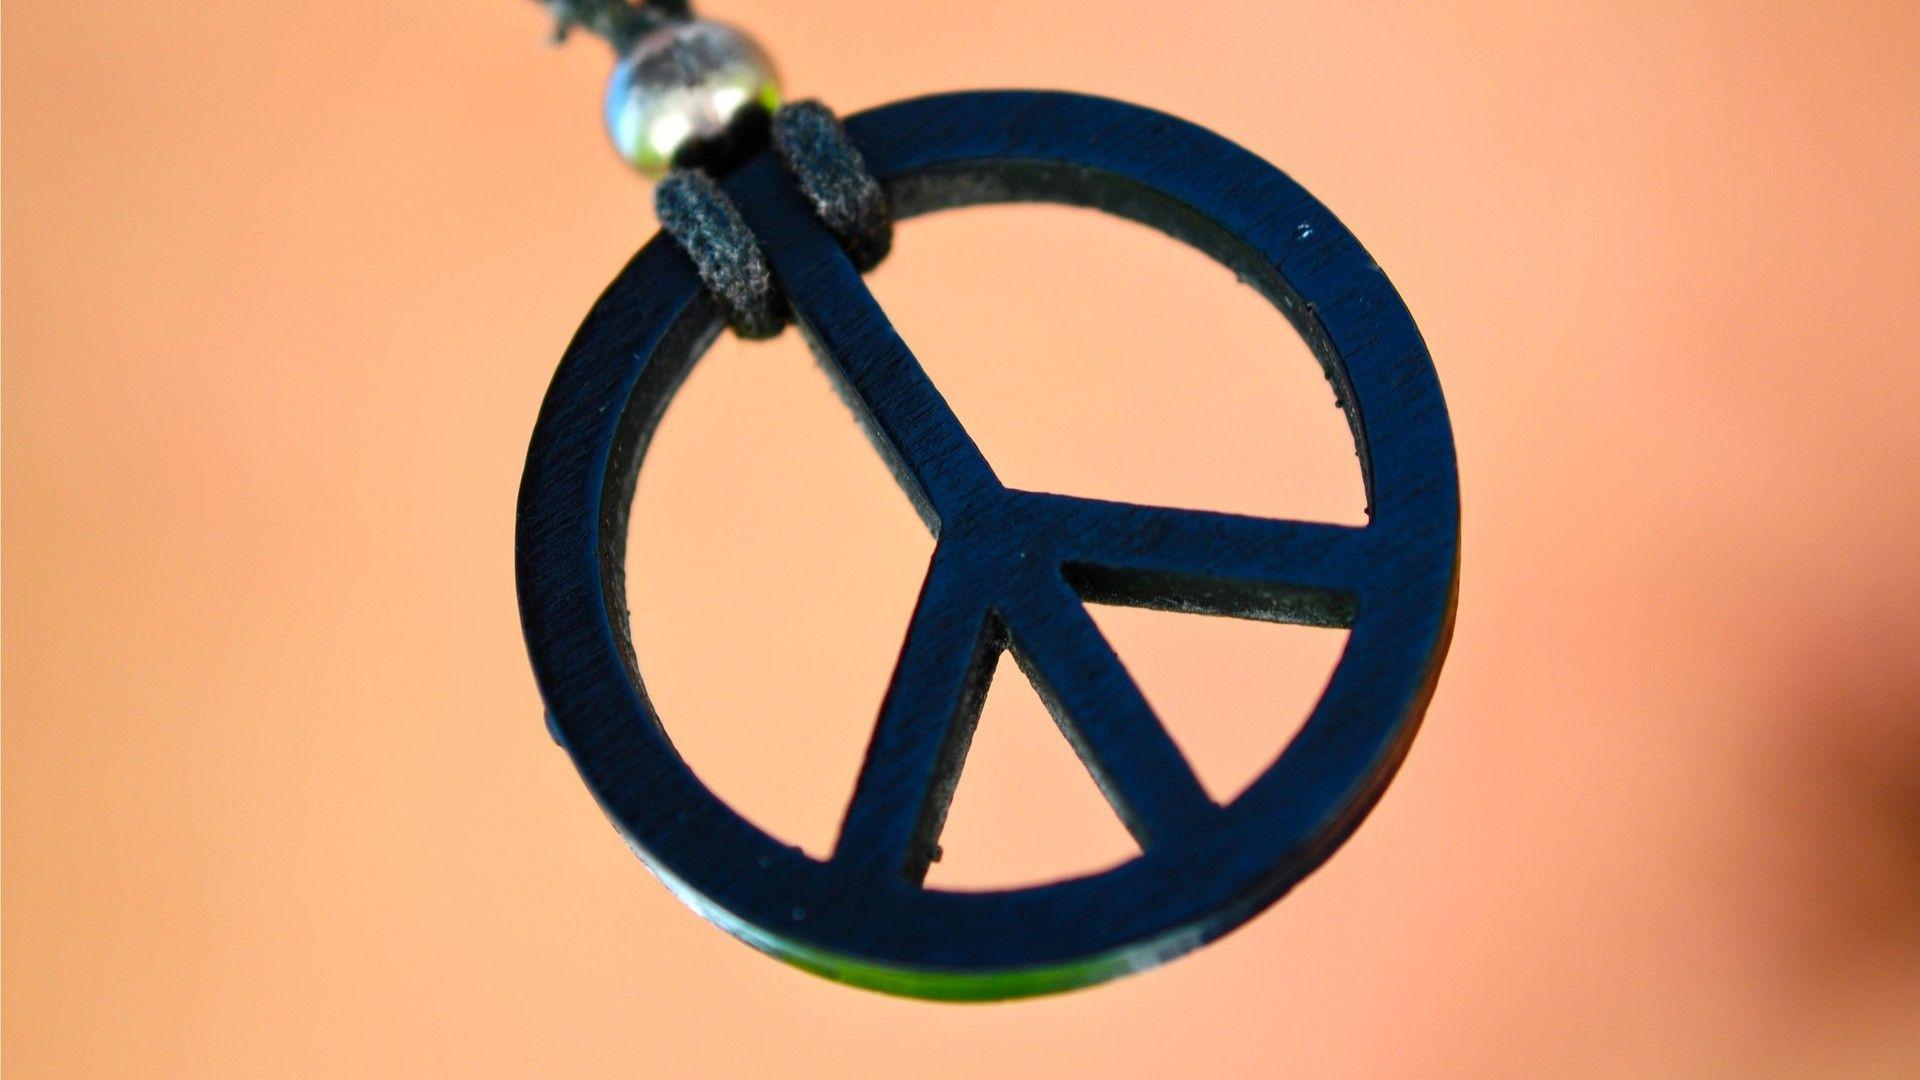 Peace sign wallpaper. PC